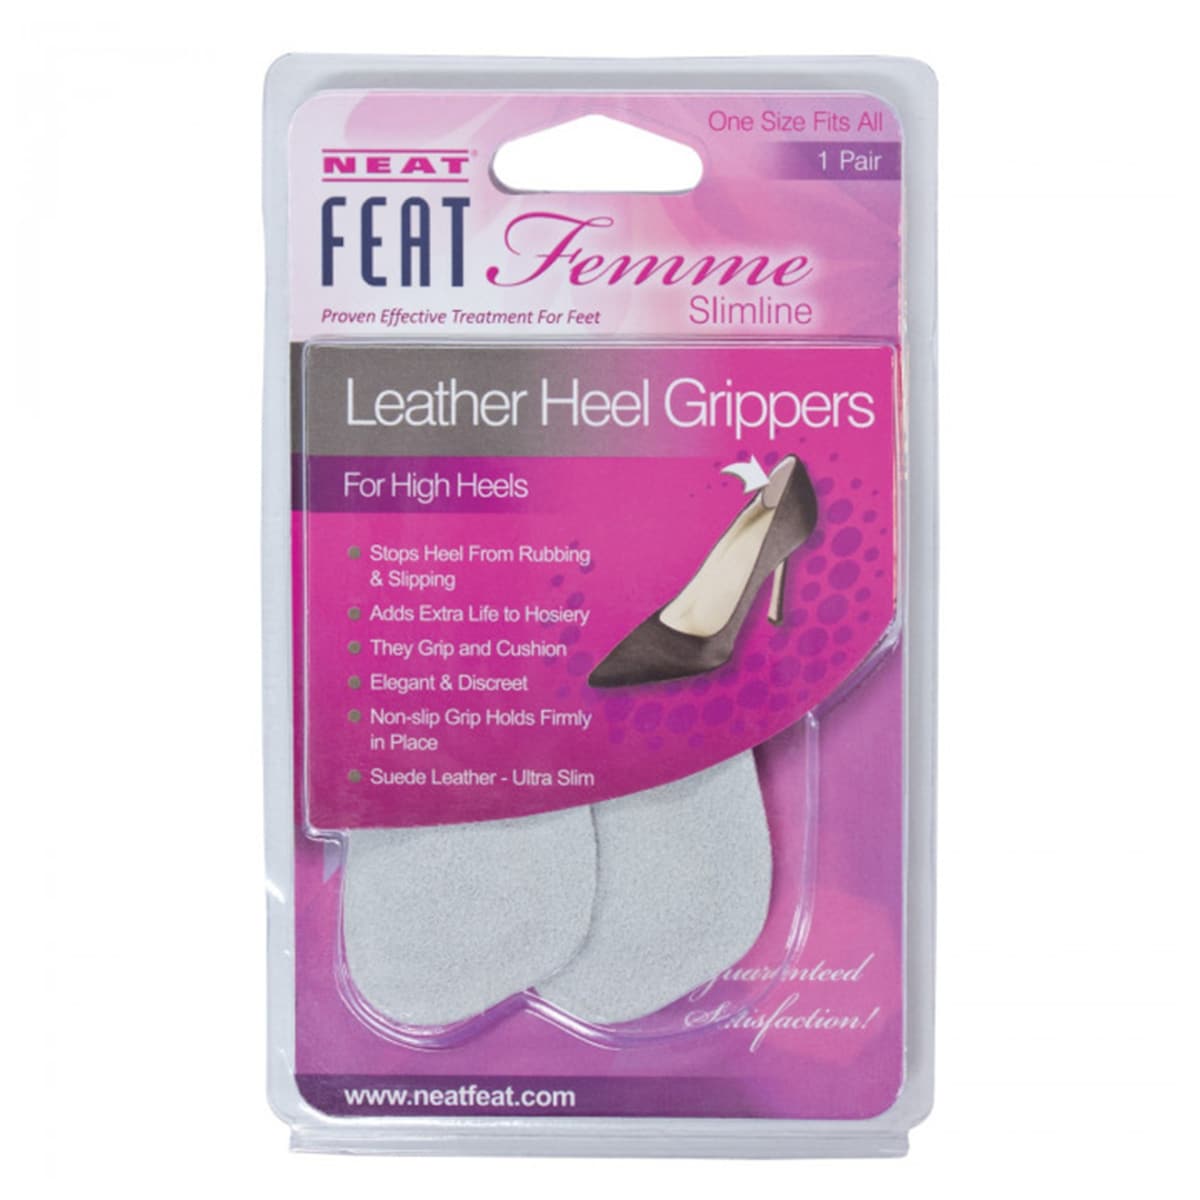 Neat Feat Leather Heel Grippers Protection from Rubbing 1 Pair